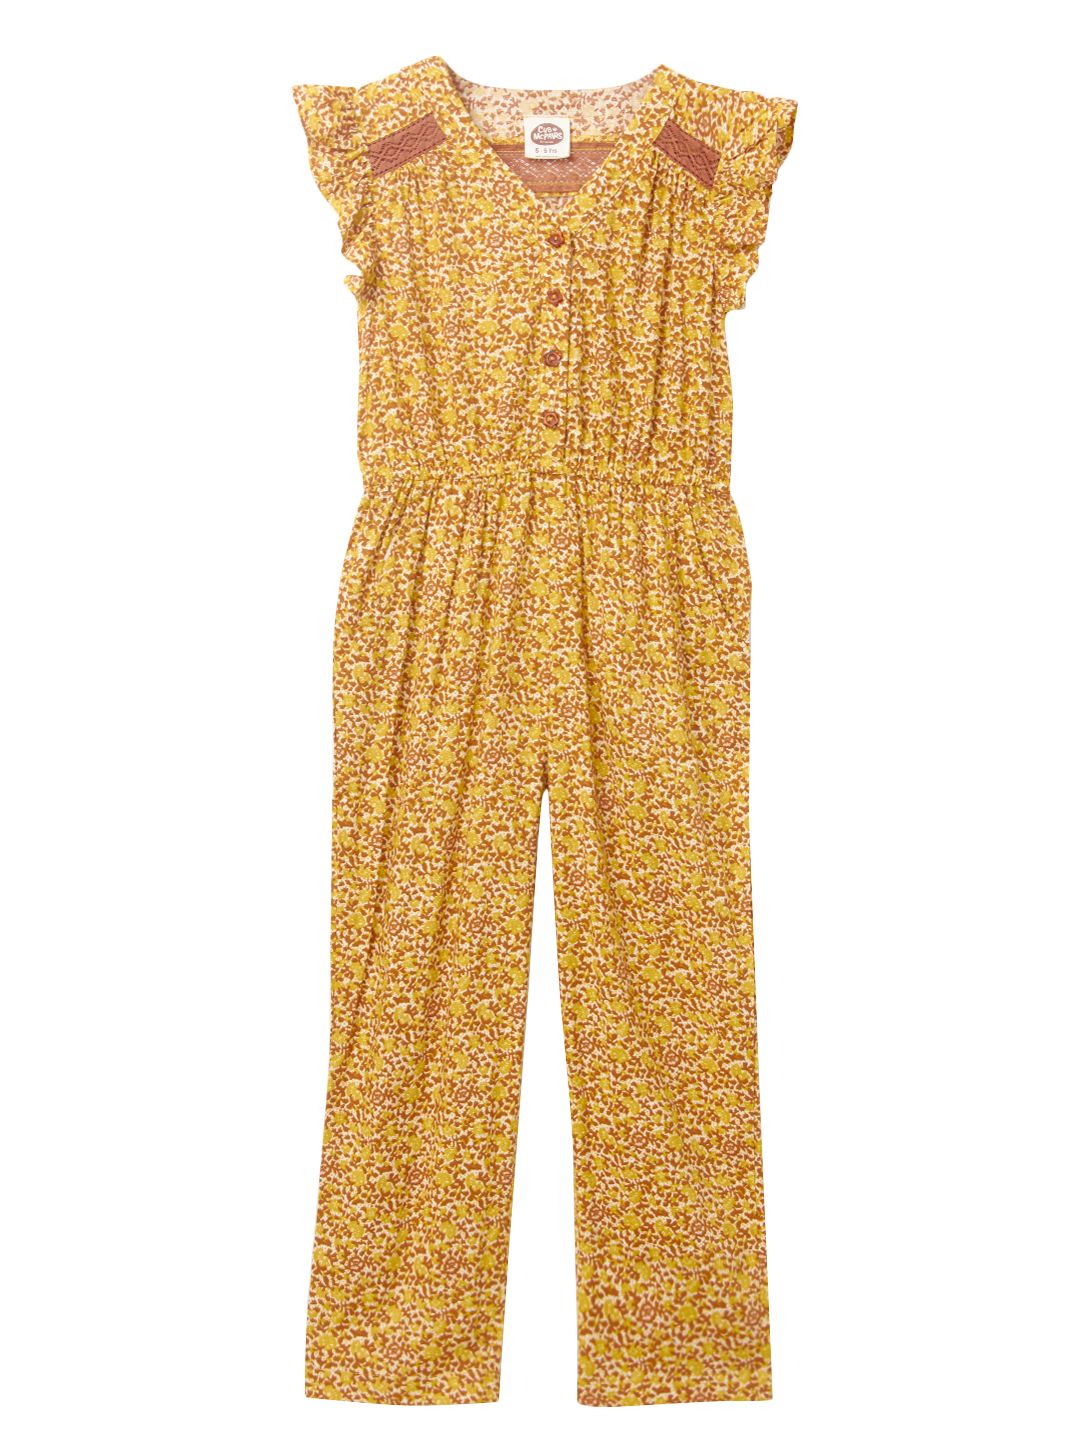 Stylish and Trendy short jumpsuit for girls-nlmtdanang.com.vn